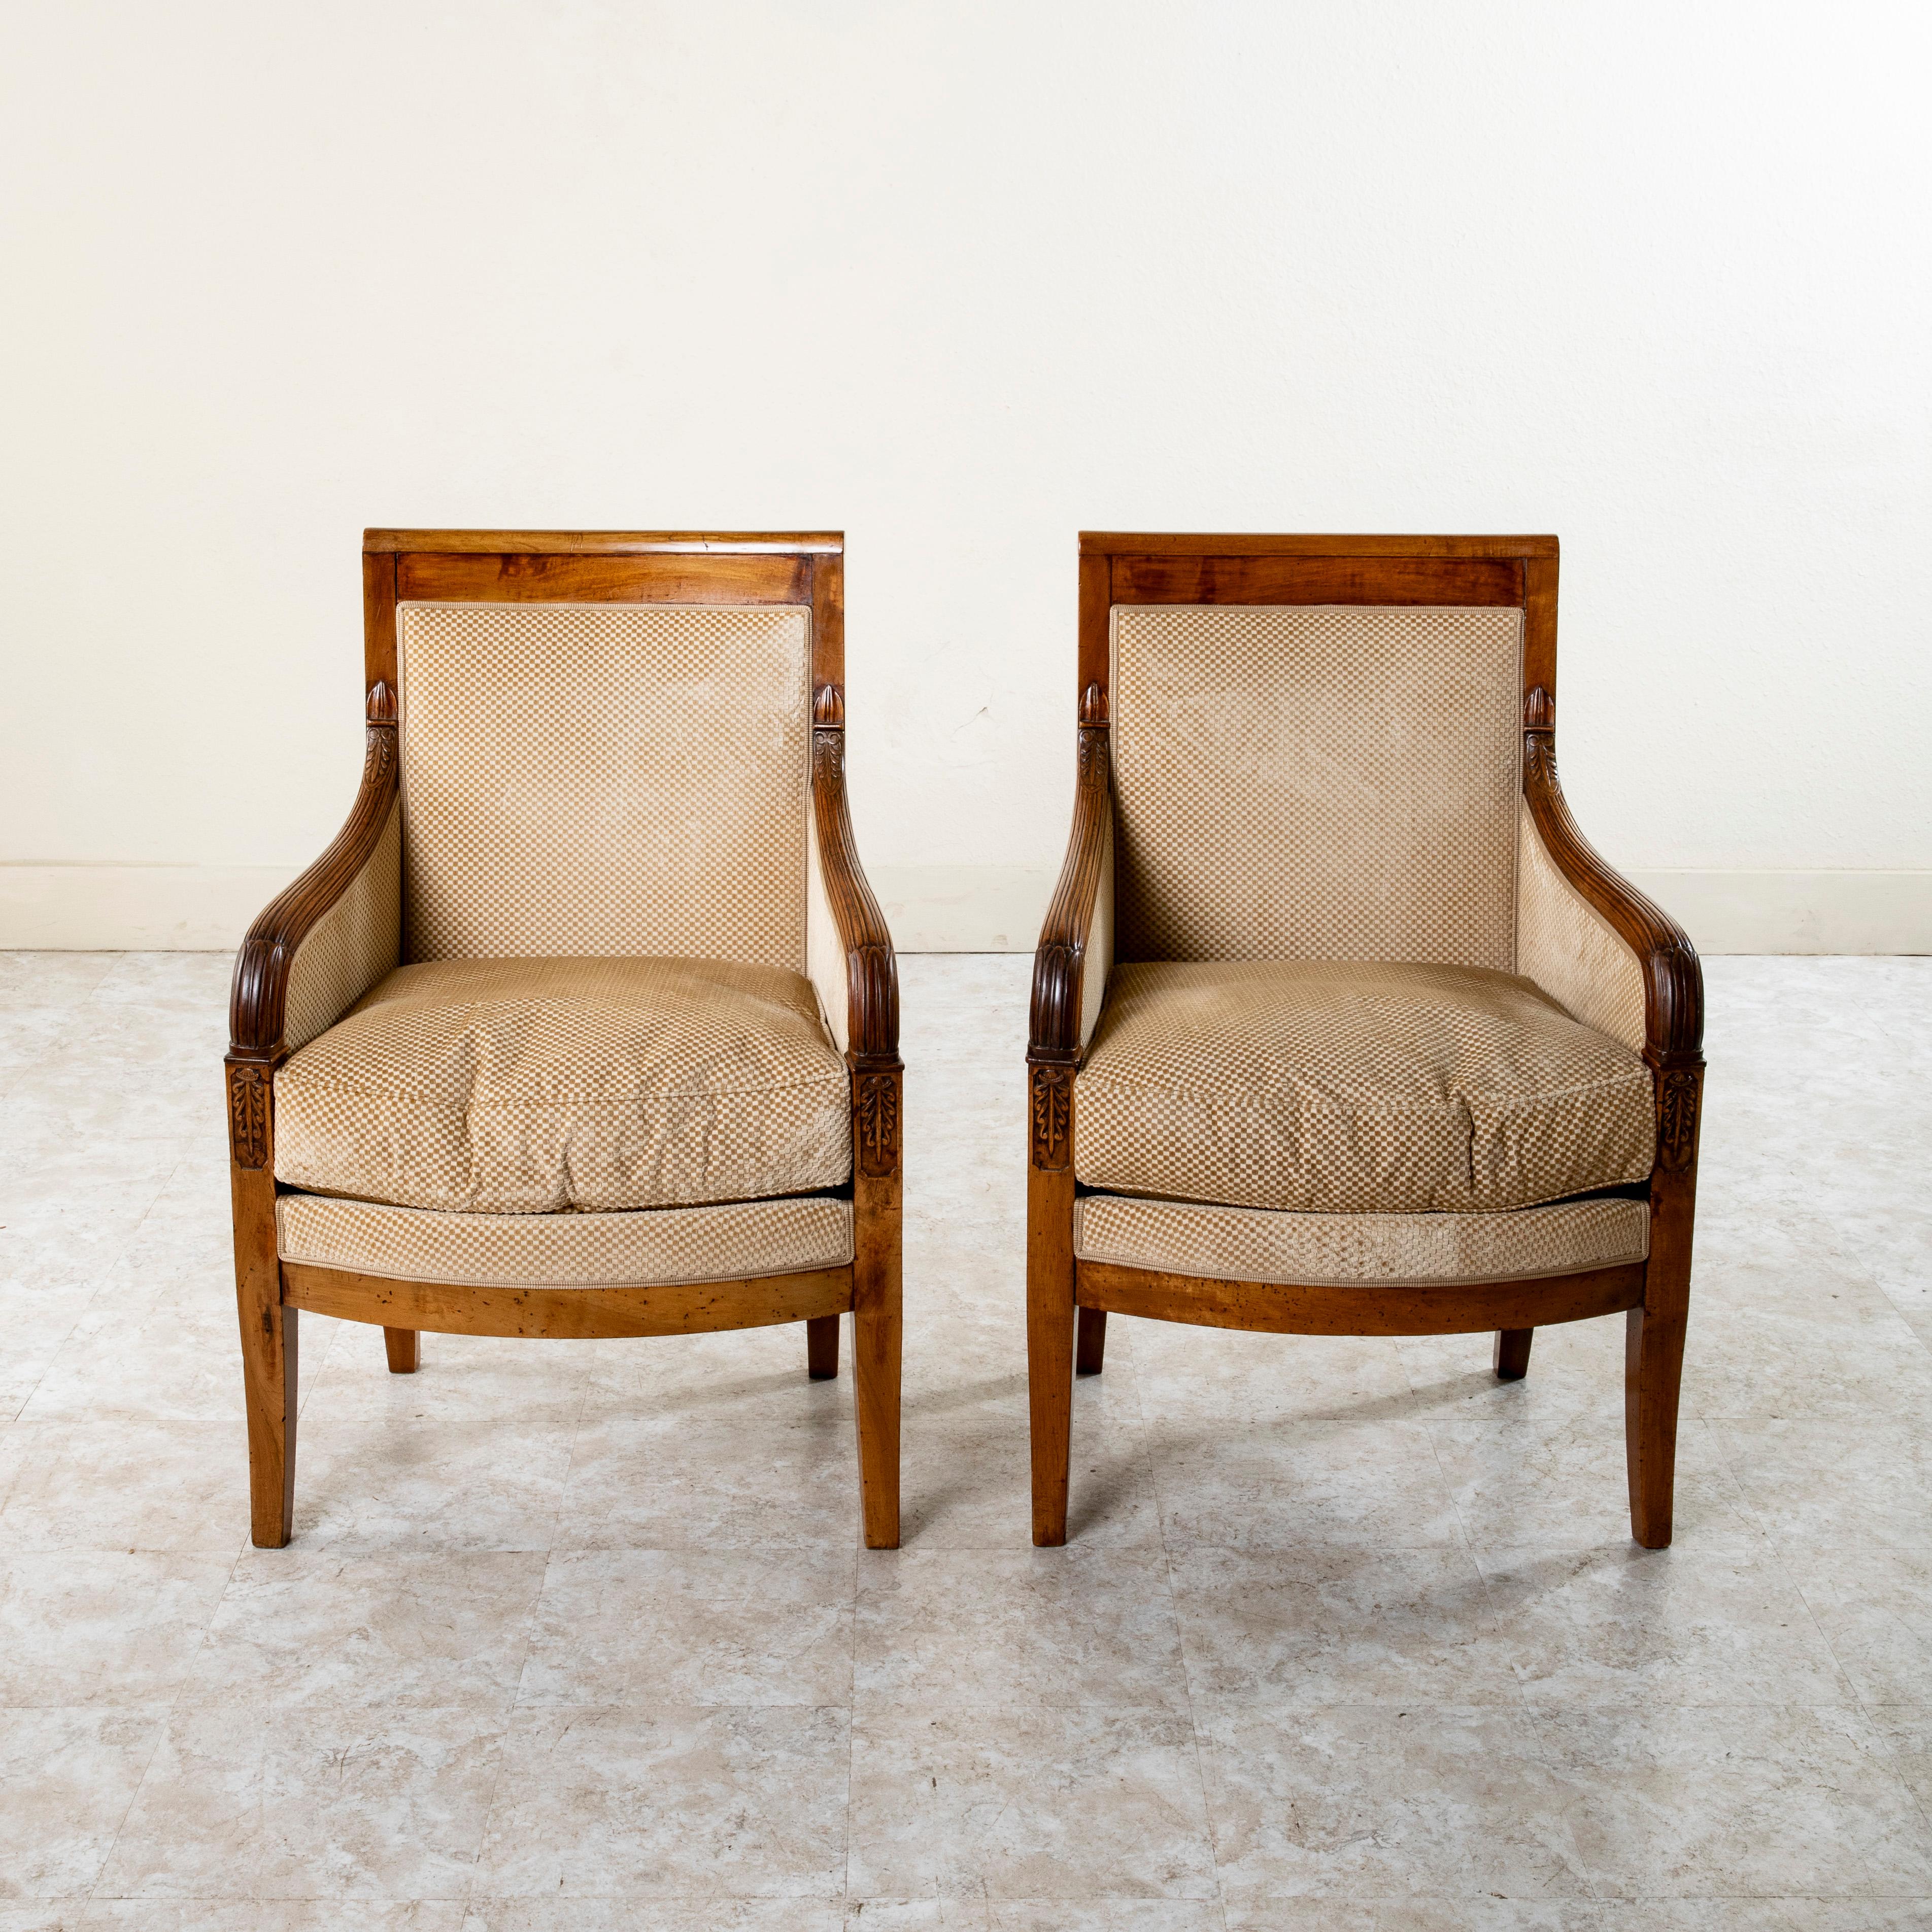 Hand-Carved Pair of 19th Century French Empire Period Hand Carved Walnut Bergeres, Armchairs For Sale